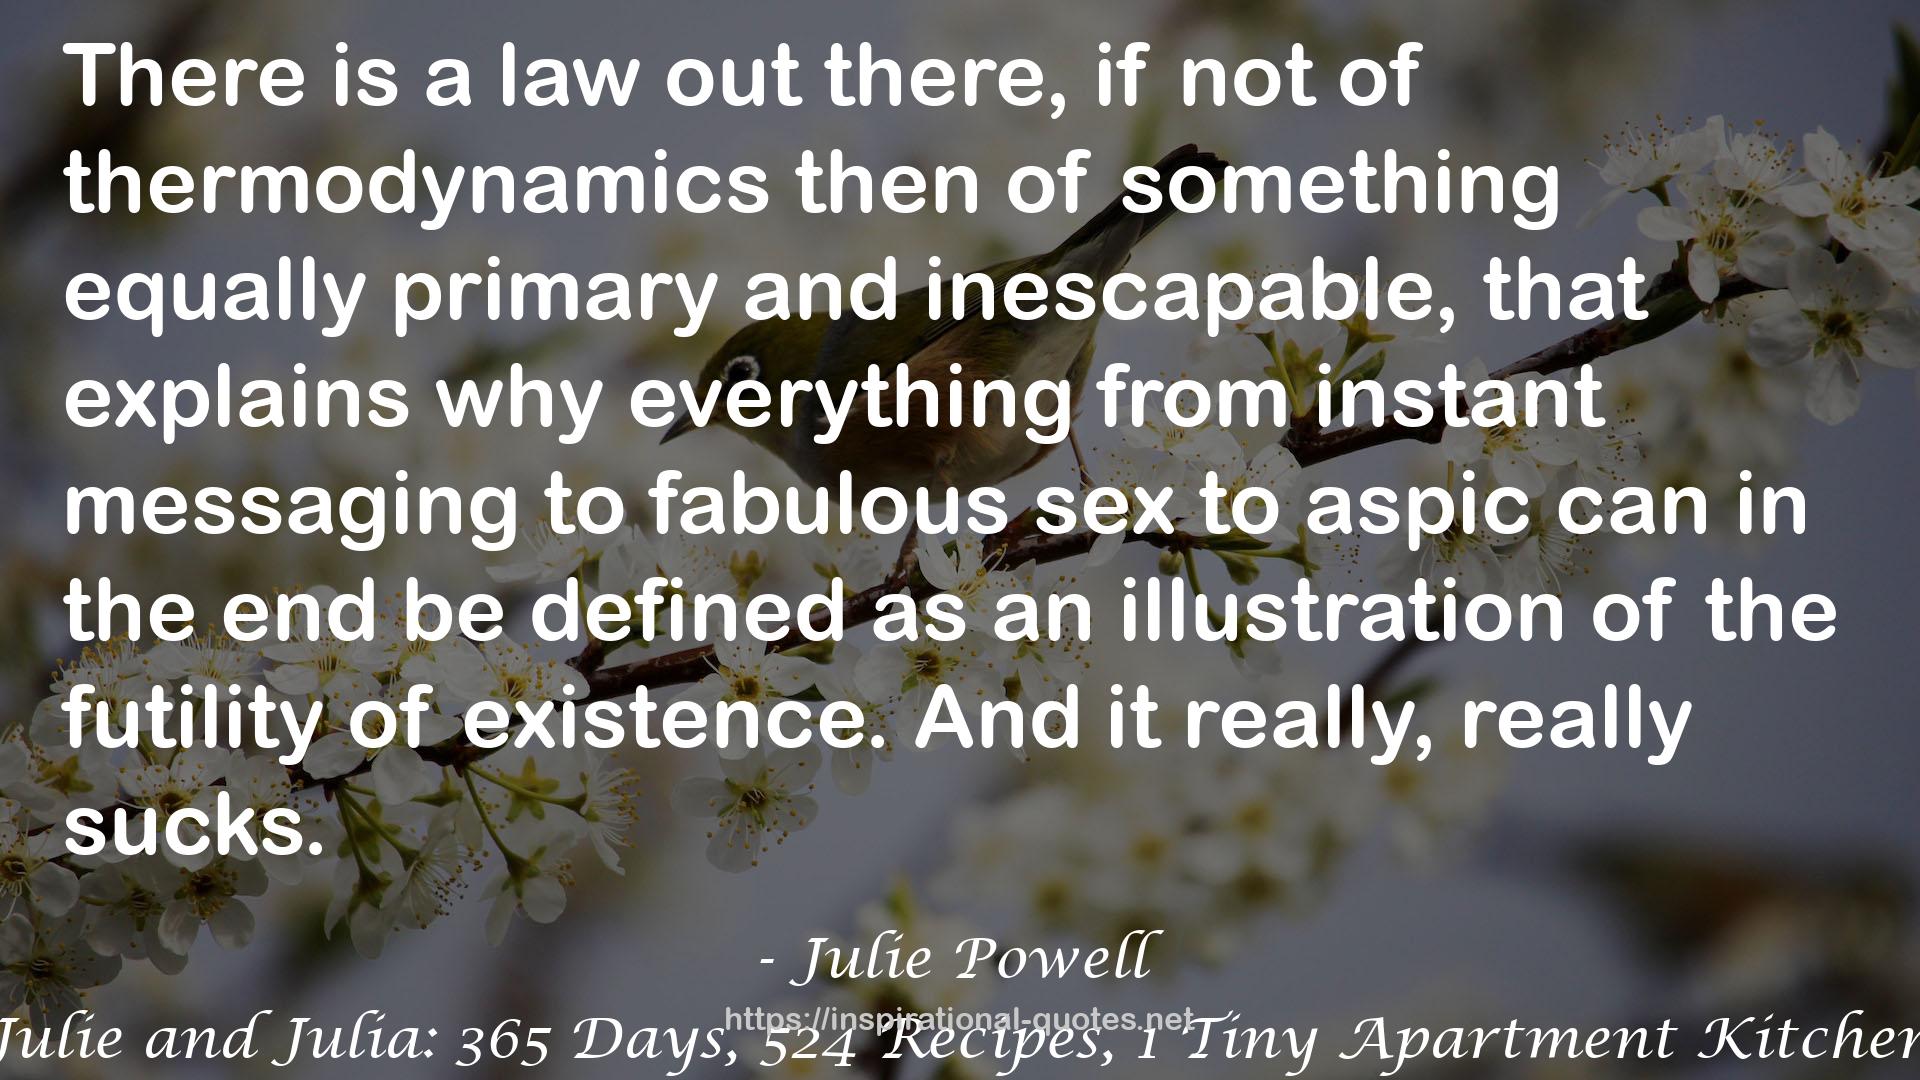 Julie Powell QUOTES